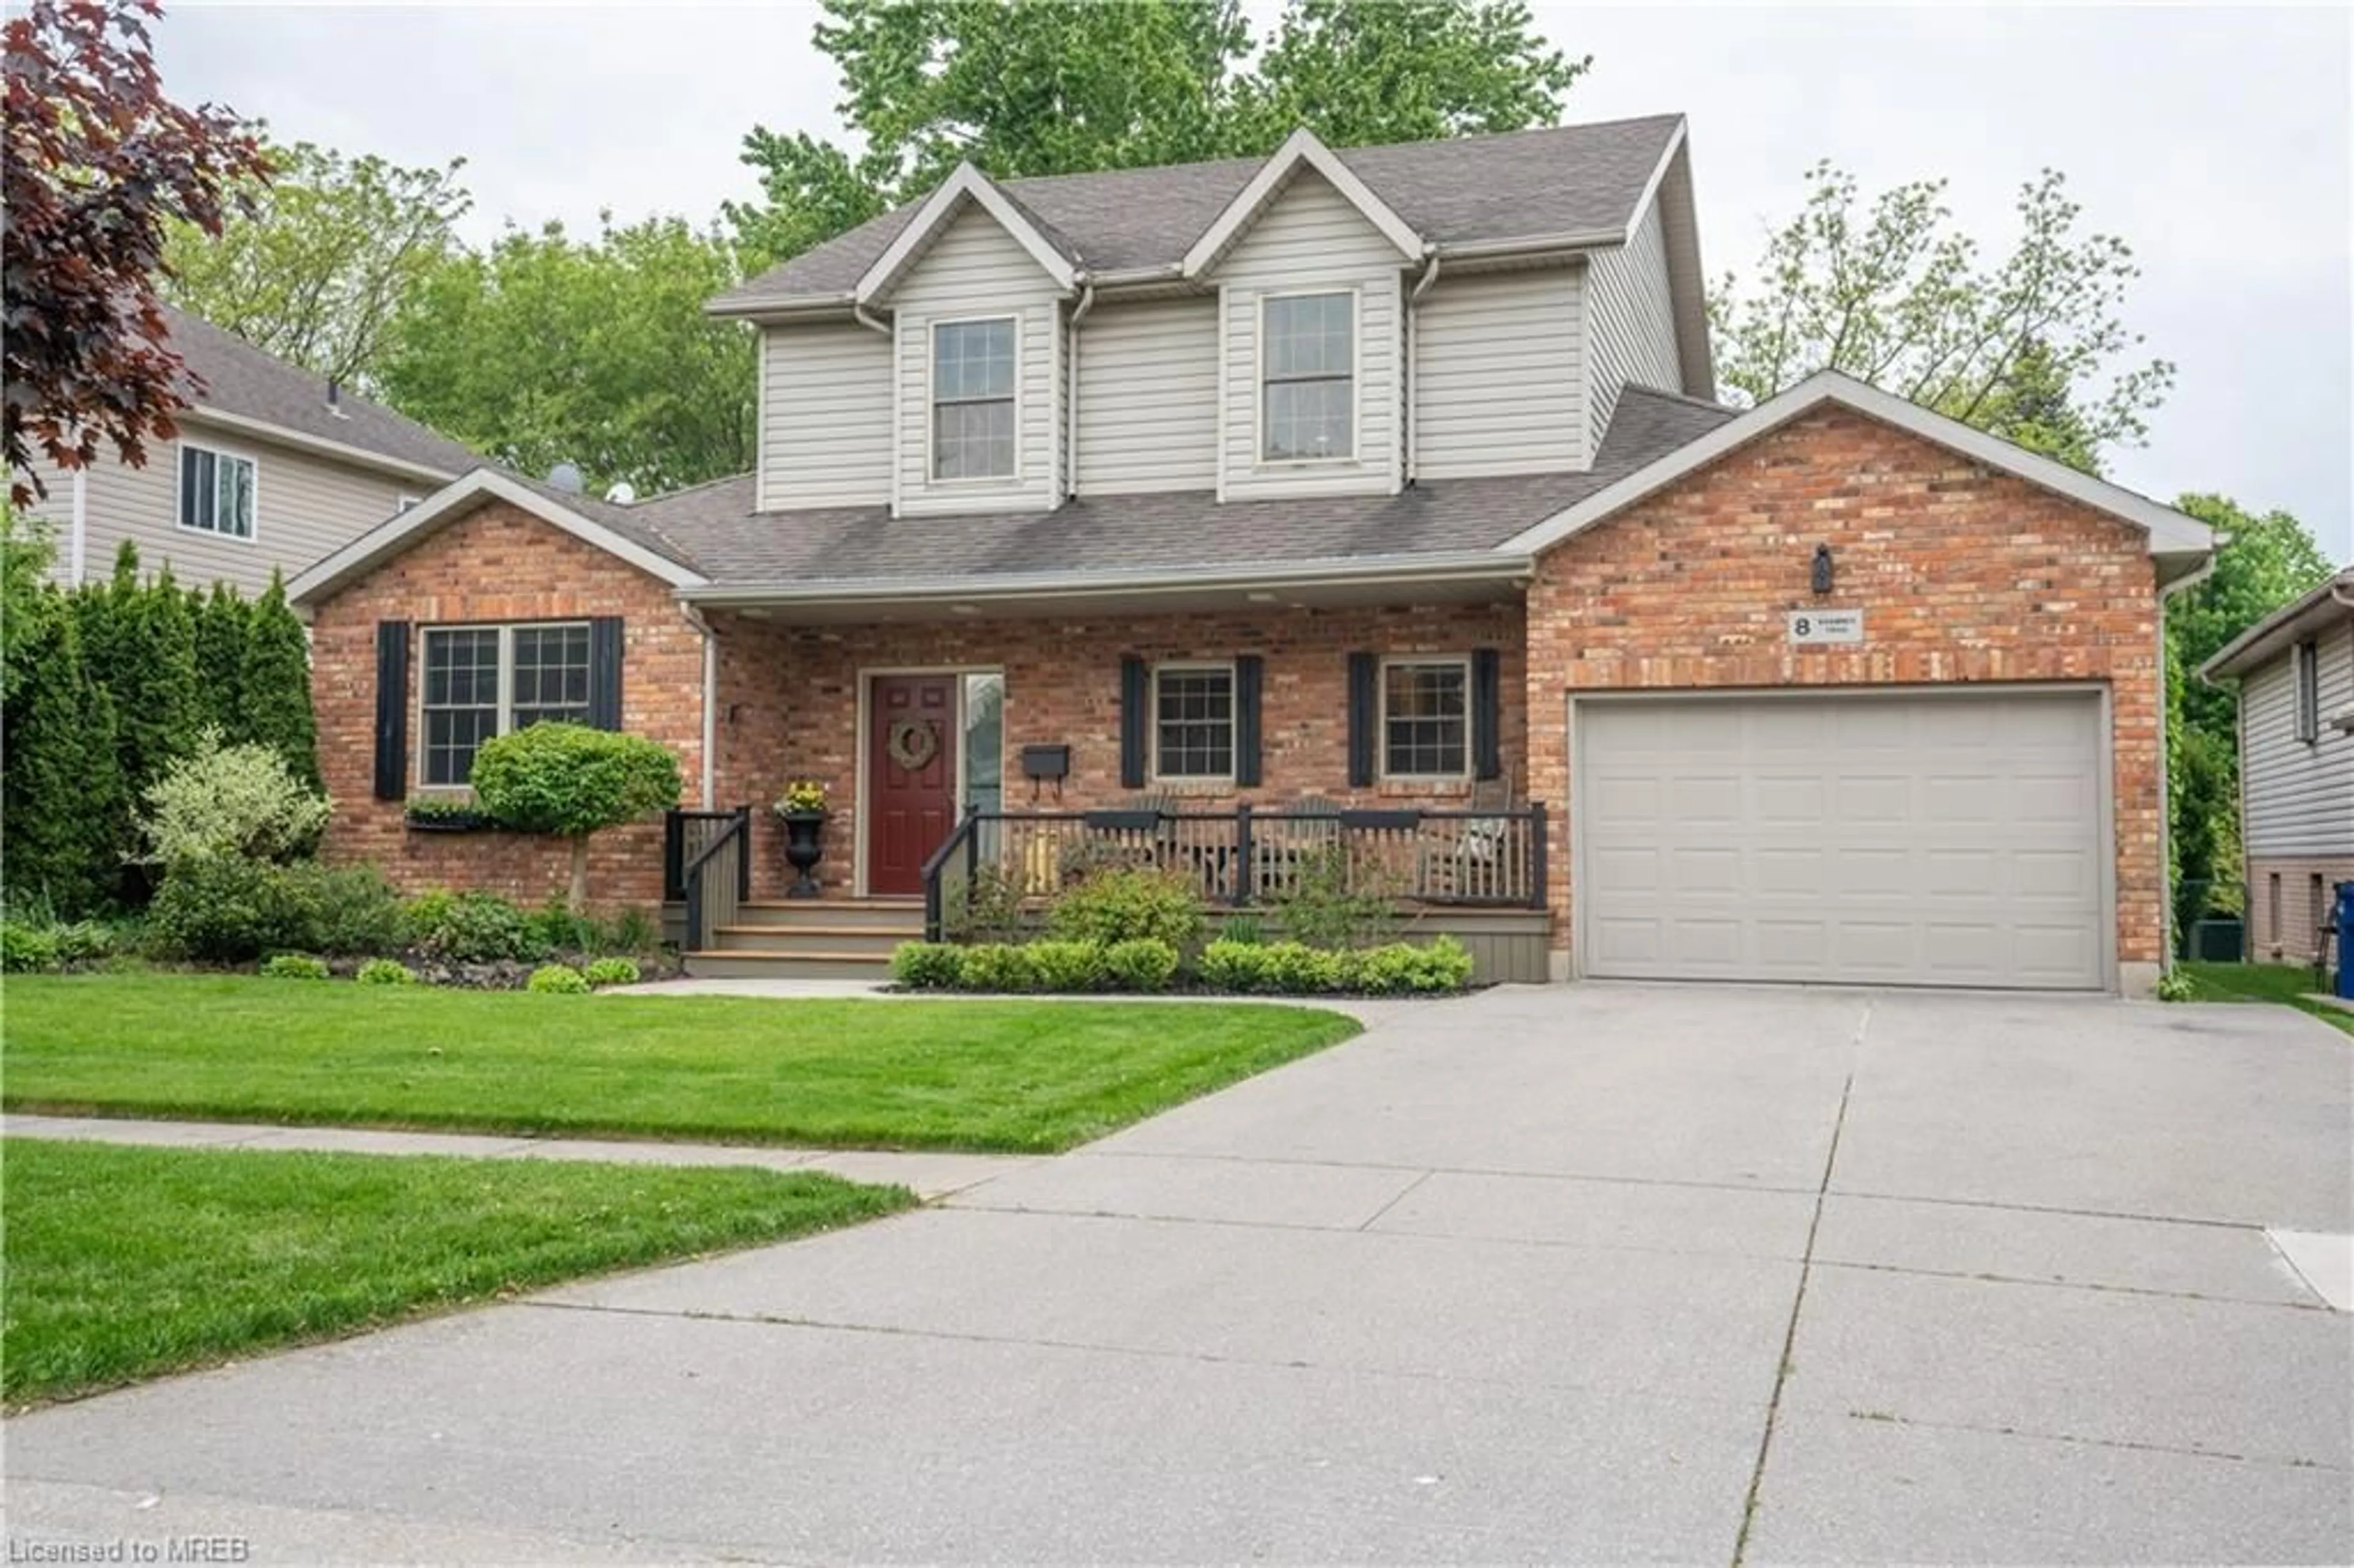 Home with brick exterior material for 8 Shawnee Trail, Chatham Ontario N7M 6J7